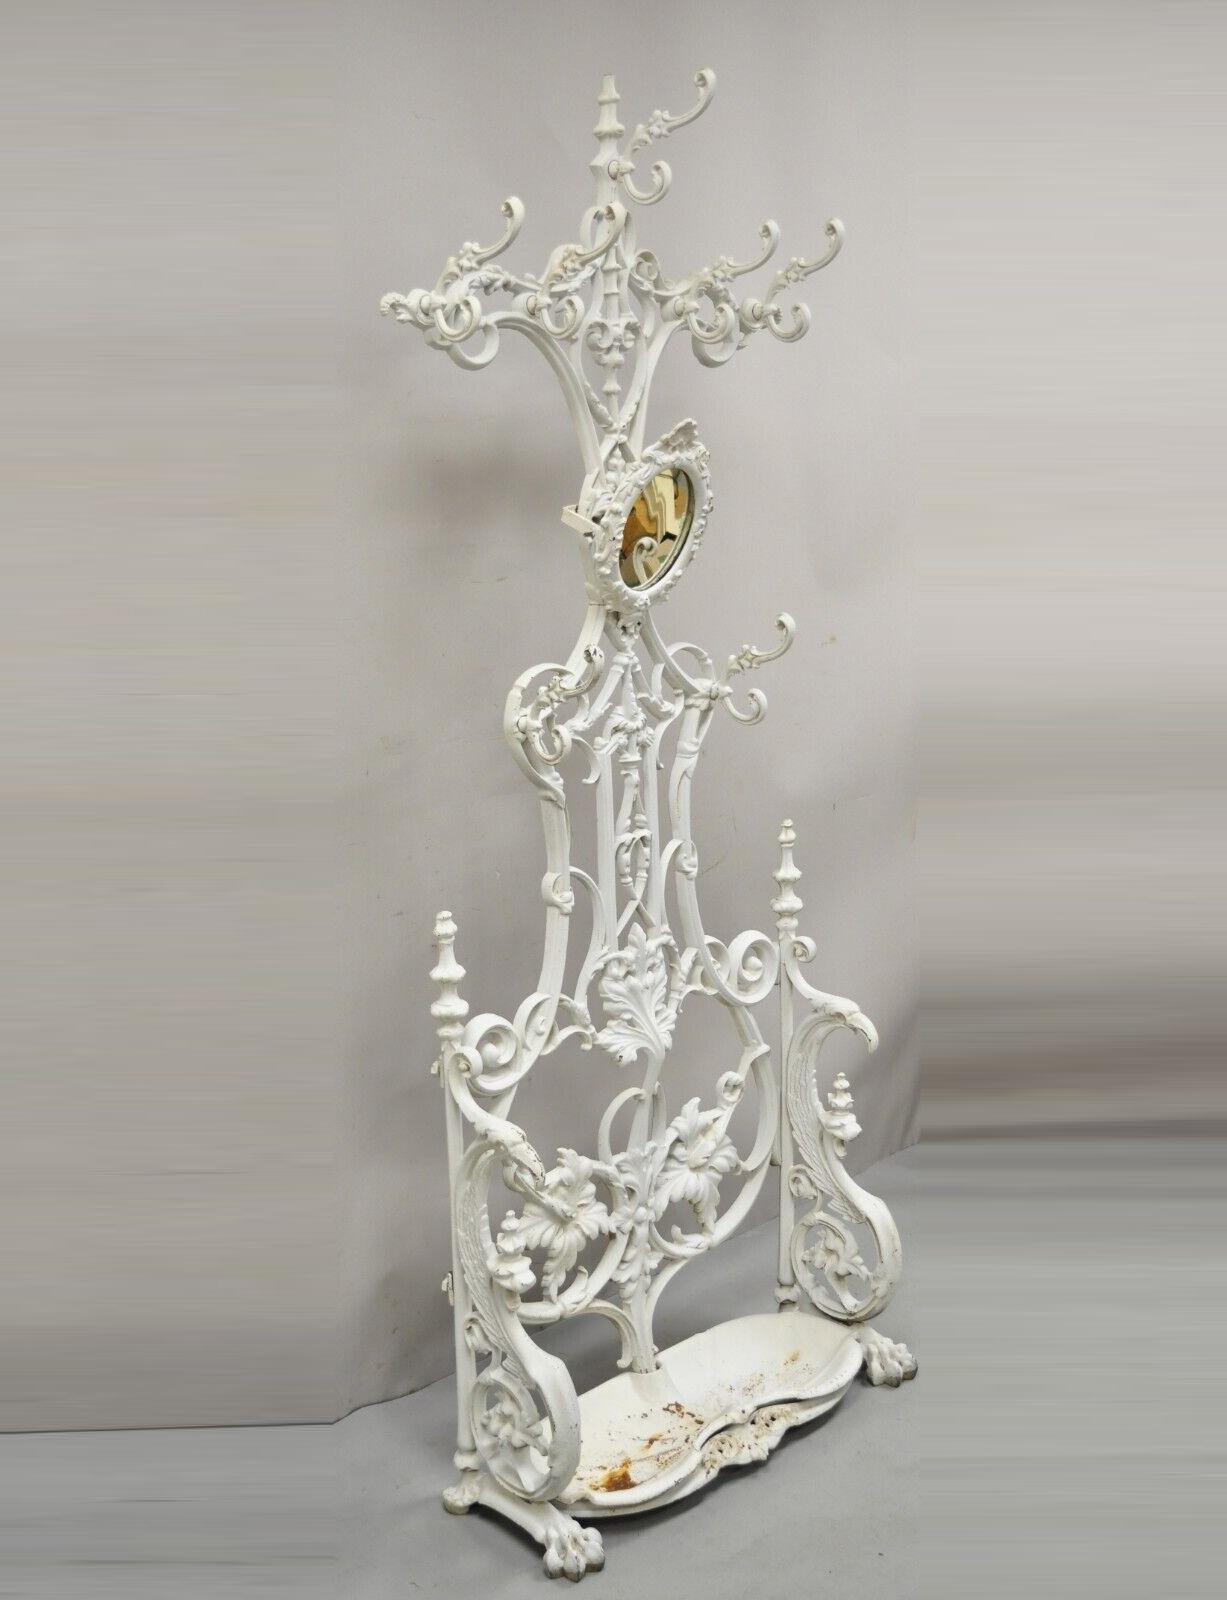 Antique French Art Nouveau Cast Iron Hall Tree Stand attributed to Alfred Corneau. Item features heavy cast iron frame, bird and griffin design to sides, removable cast iron shell form drip pan, ornate leaf and vine scroll work, paw feet, very nice